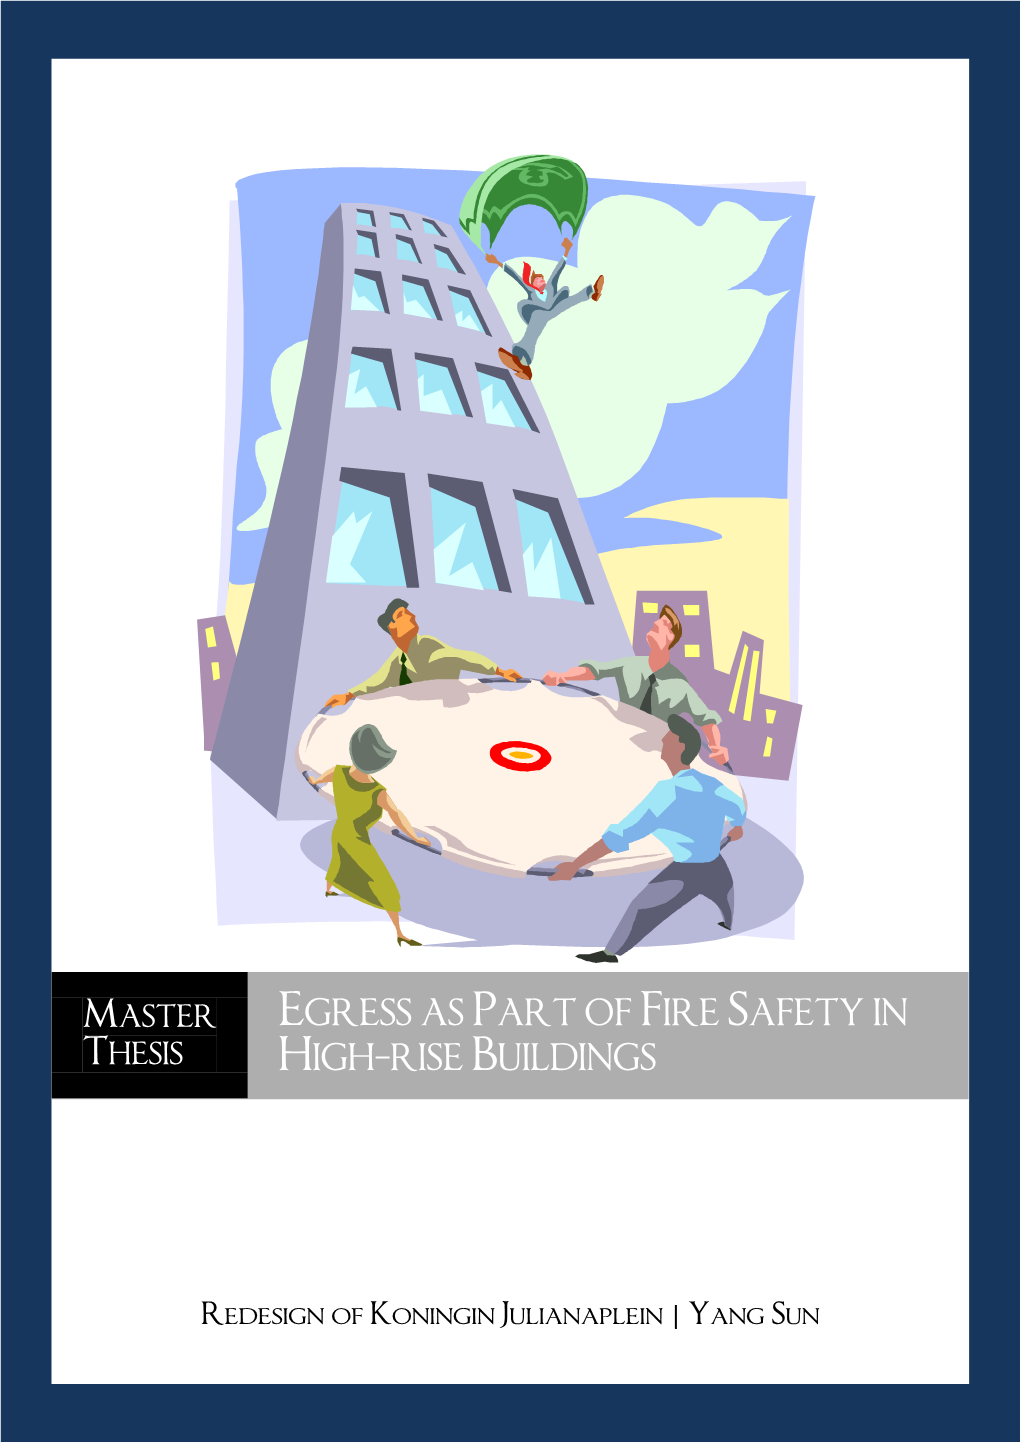 Egress As Part of Fire Safety in High-Rise Buildings